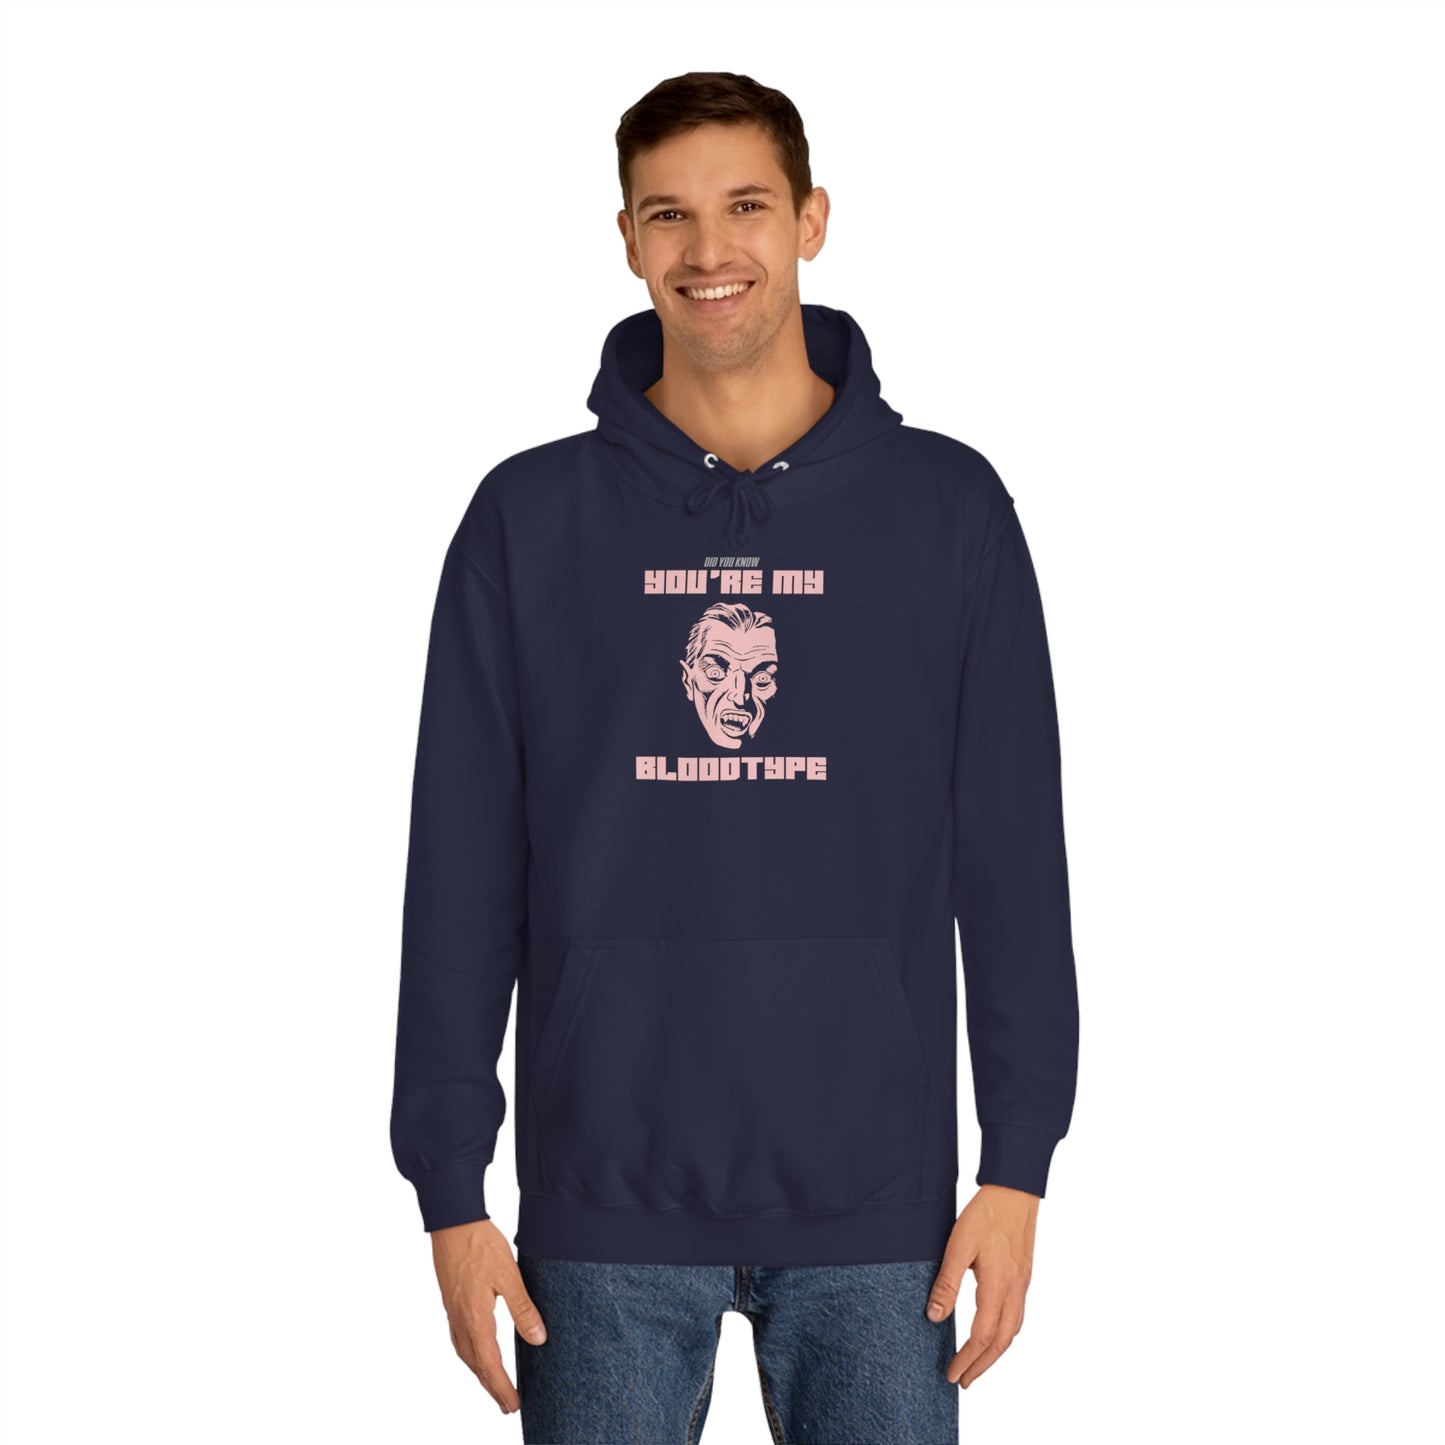 Creepy Halloween Pick up Line Hoodie that is Sure to Garner Attention